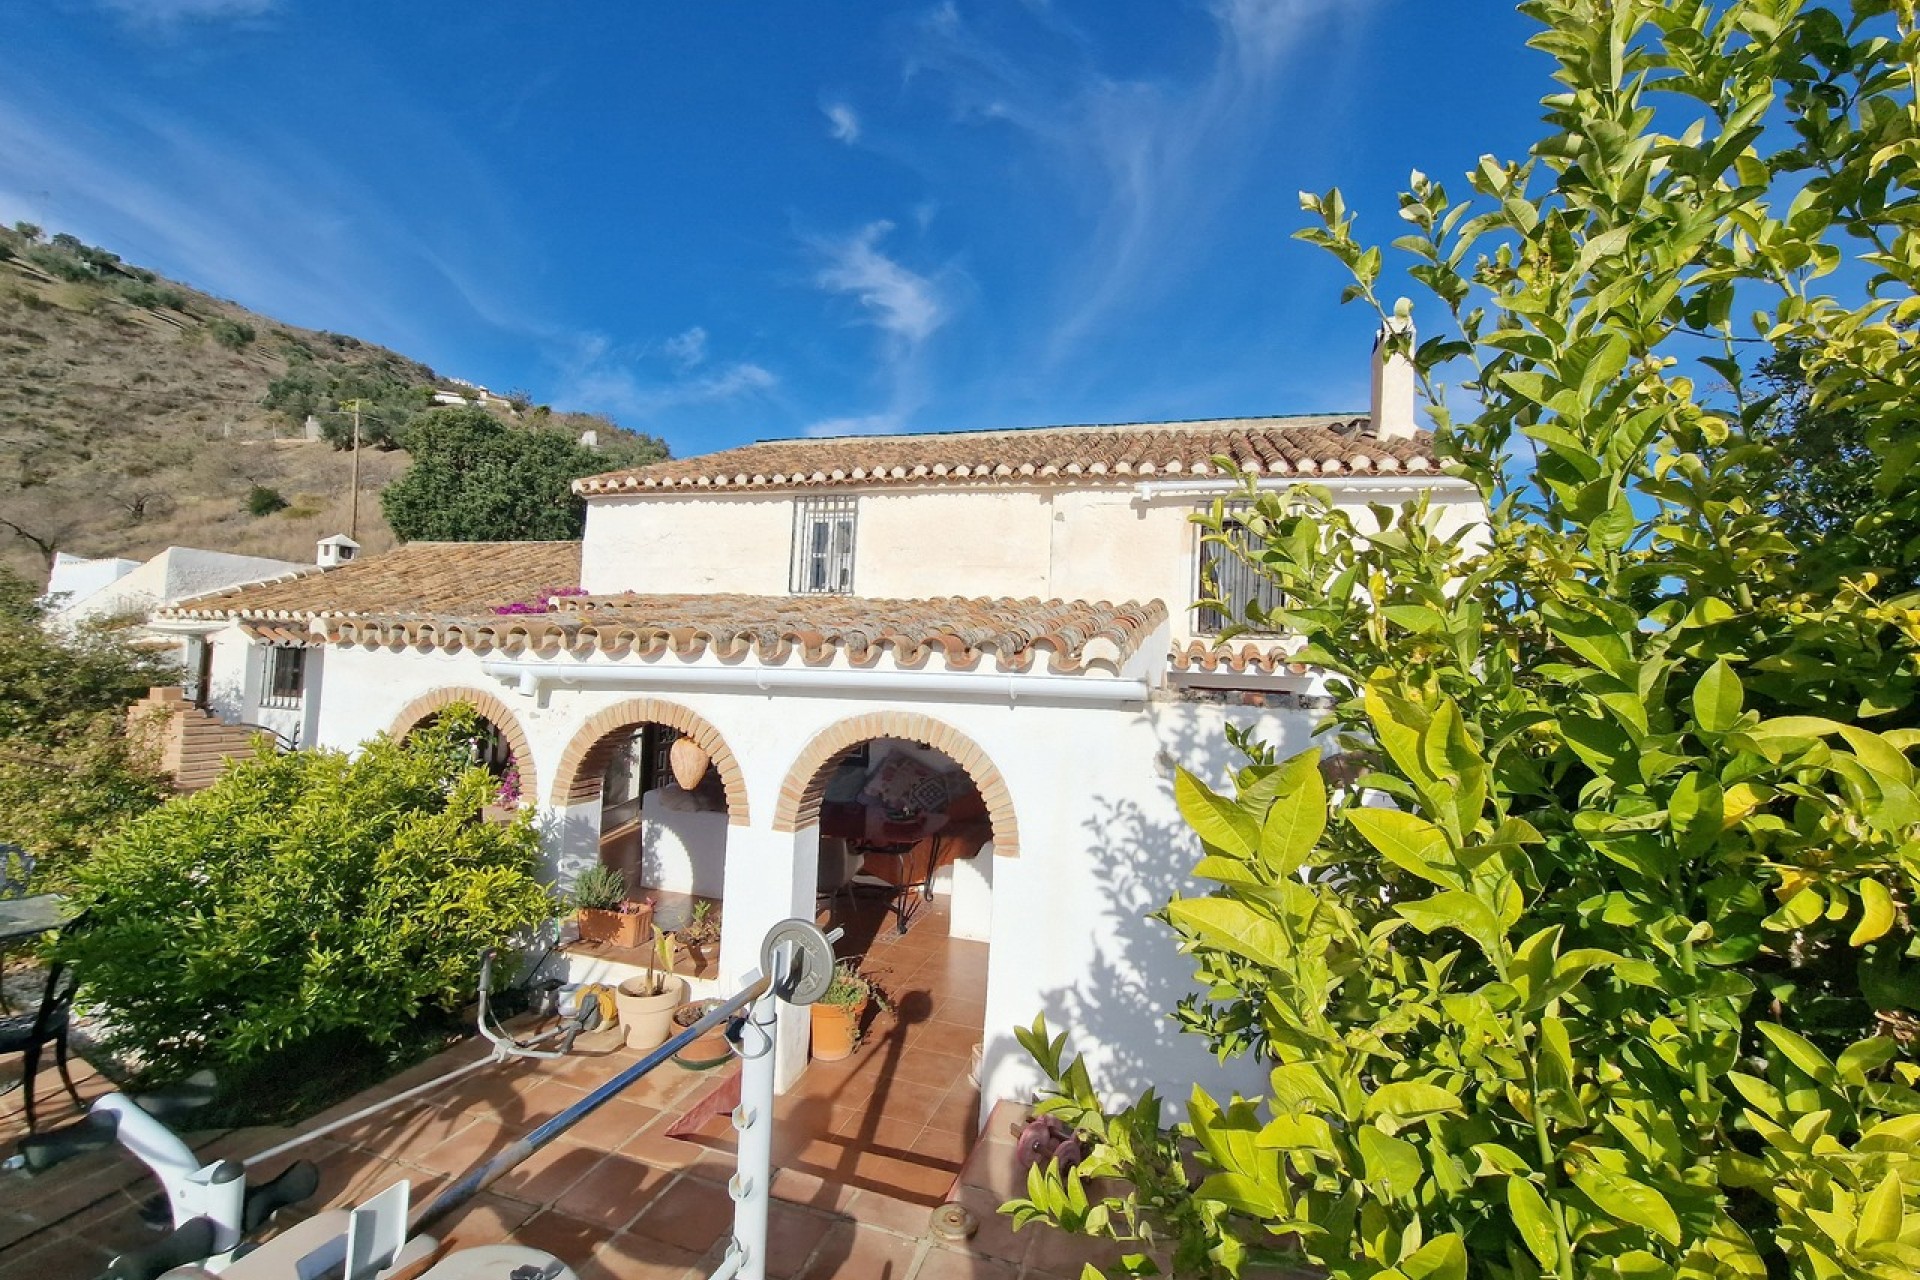 Revente - Town house -
Comares - Inland